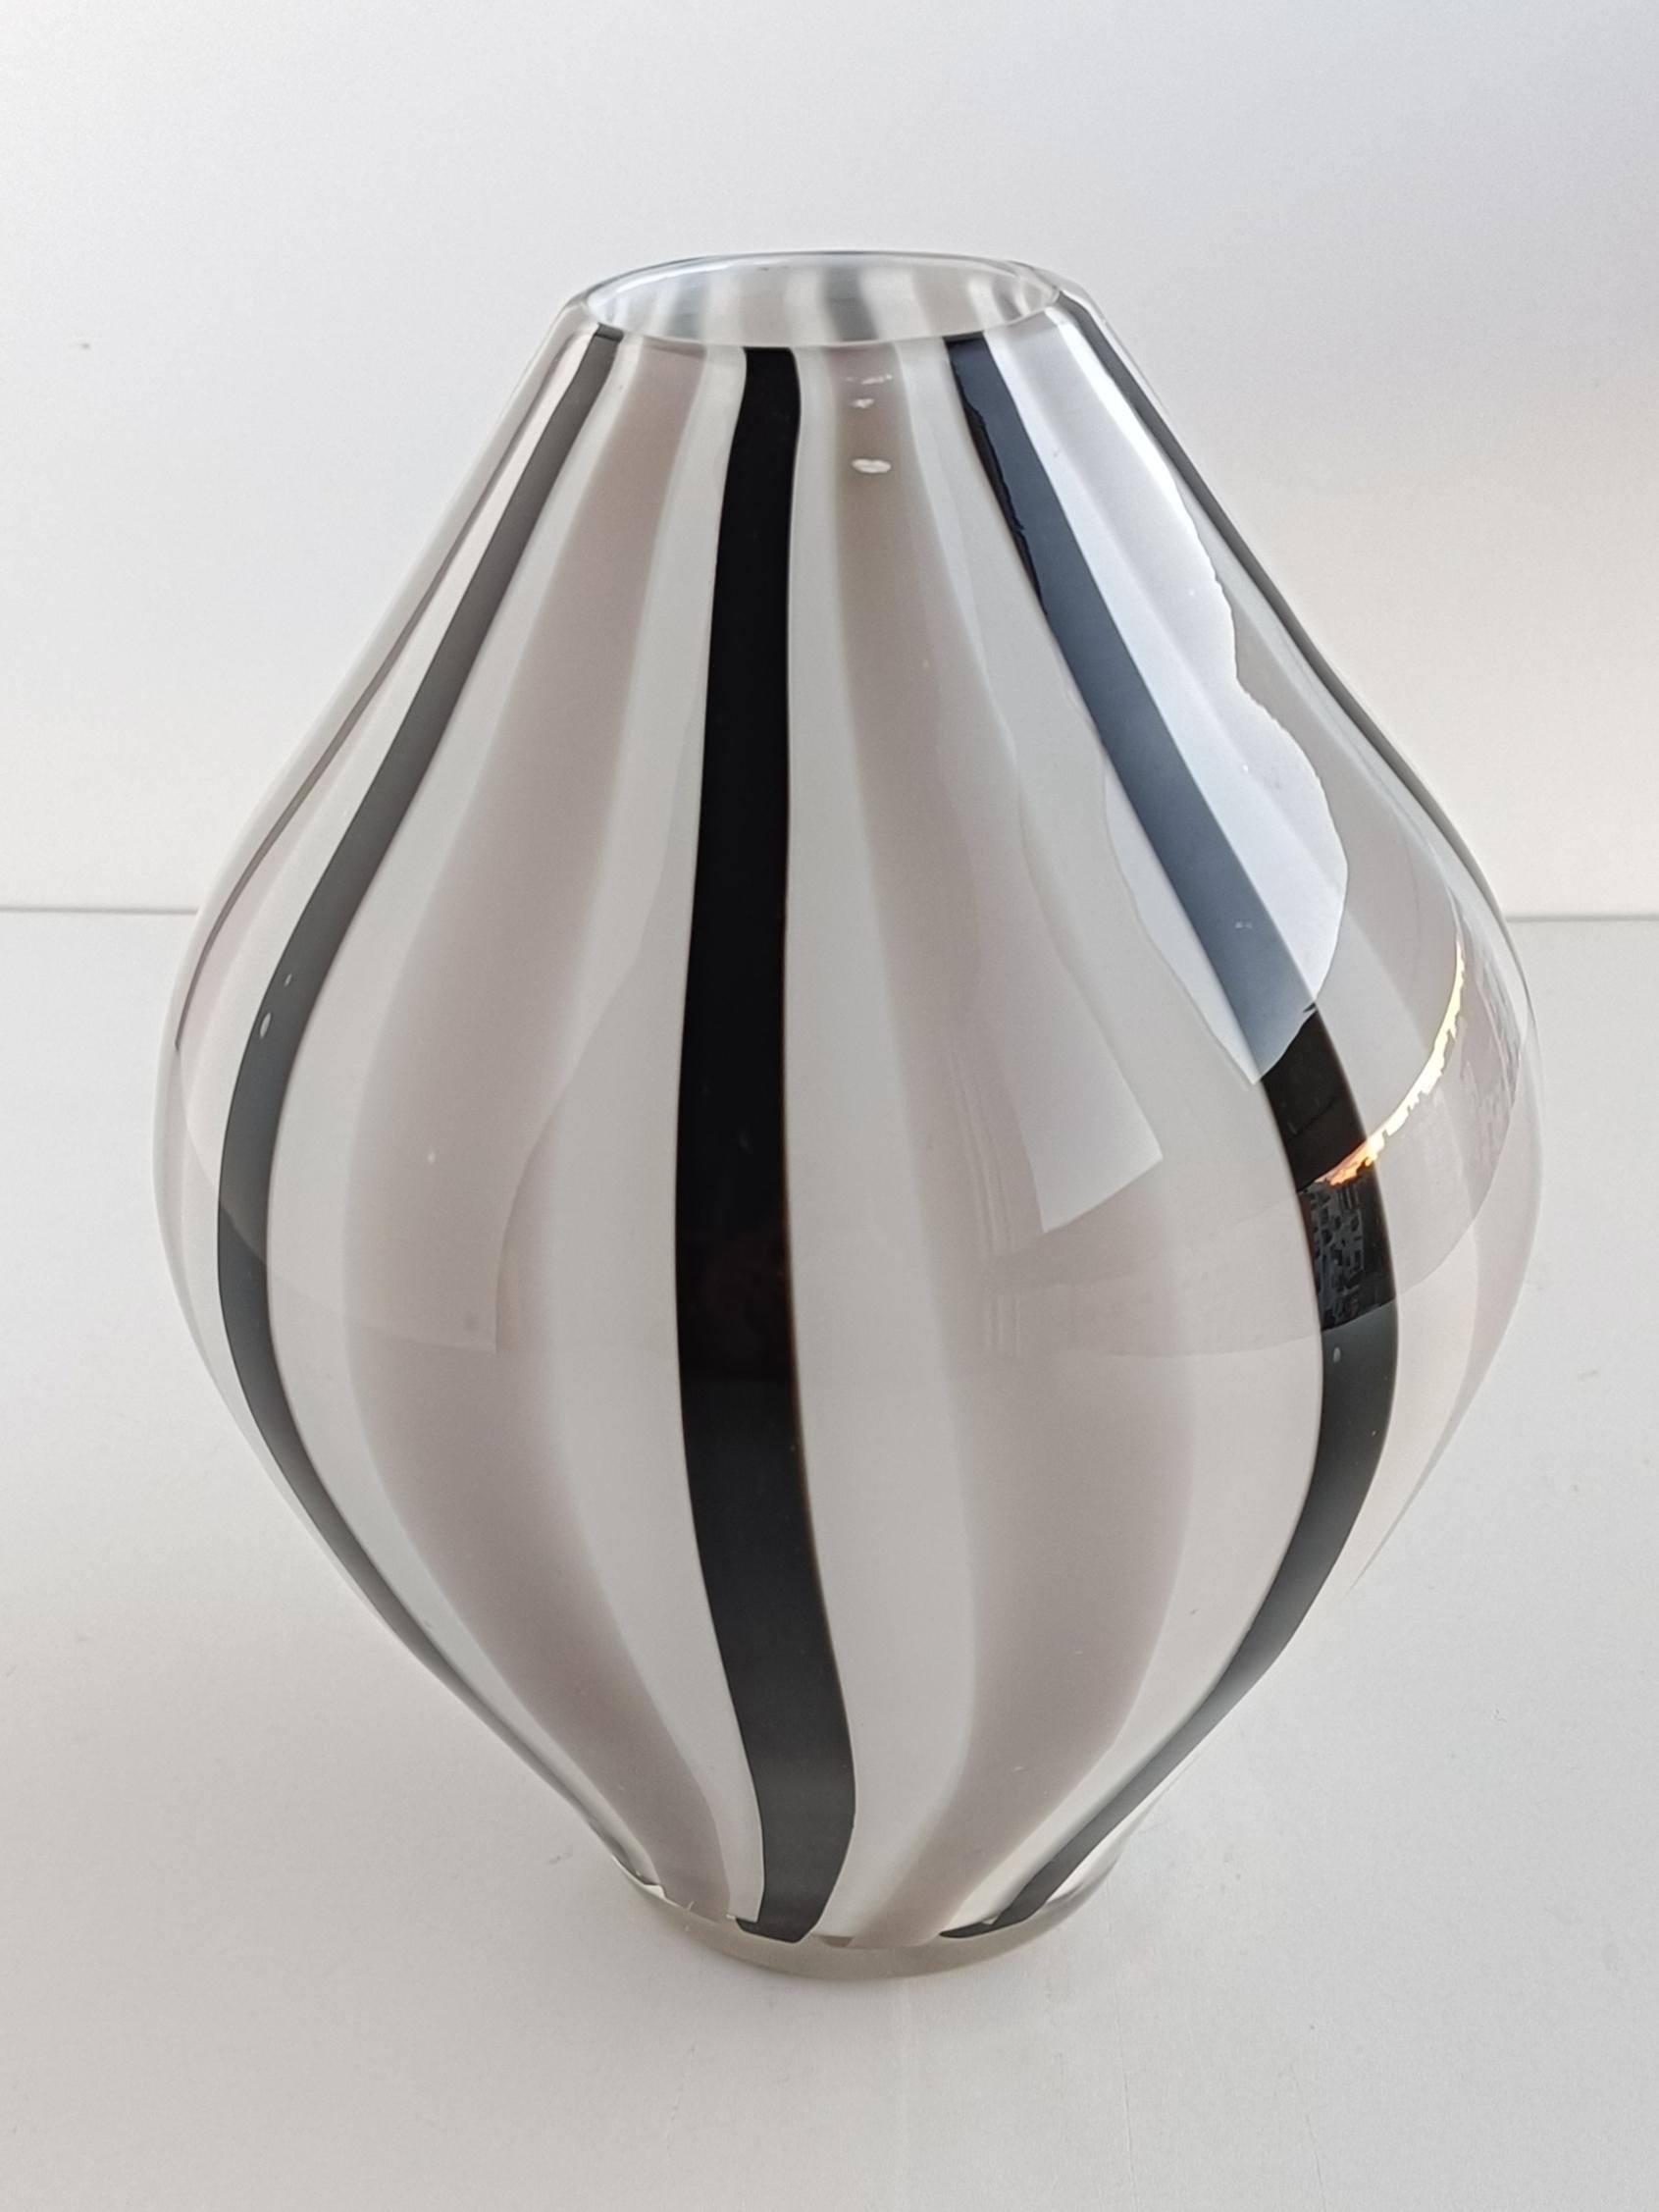 Hand-Crafted Murano Glass Graphic Design Vase, Italy, 1960s